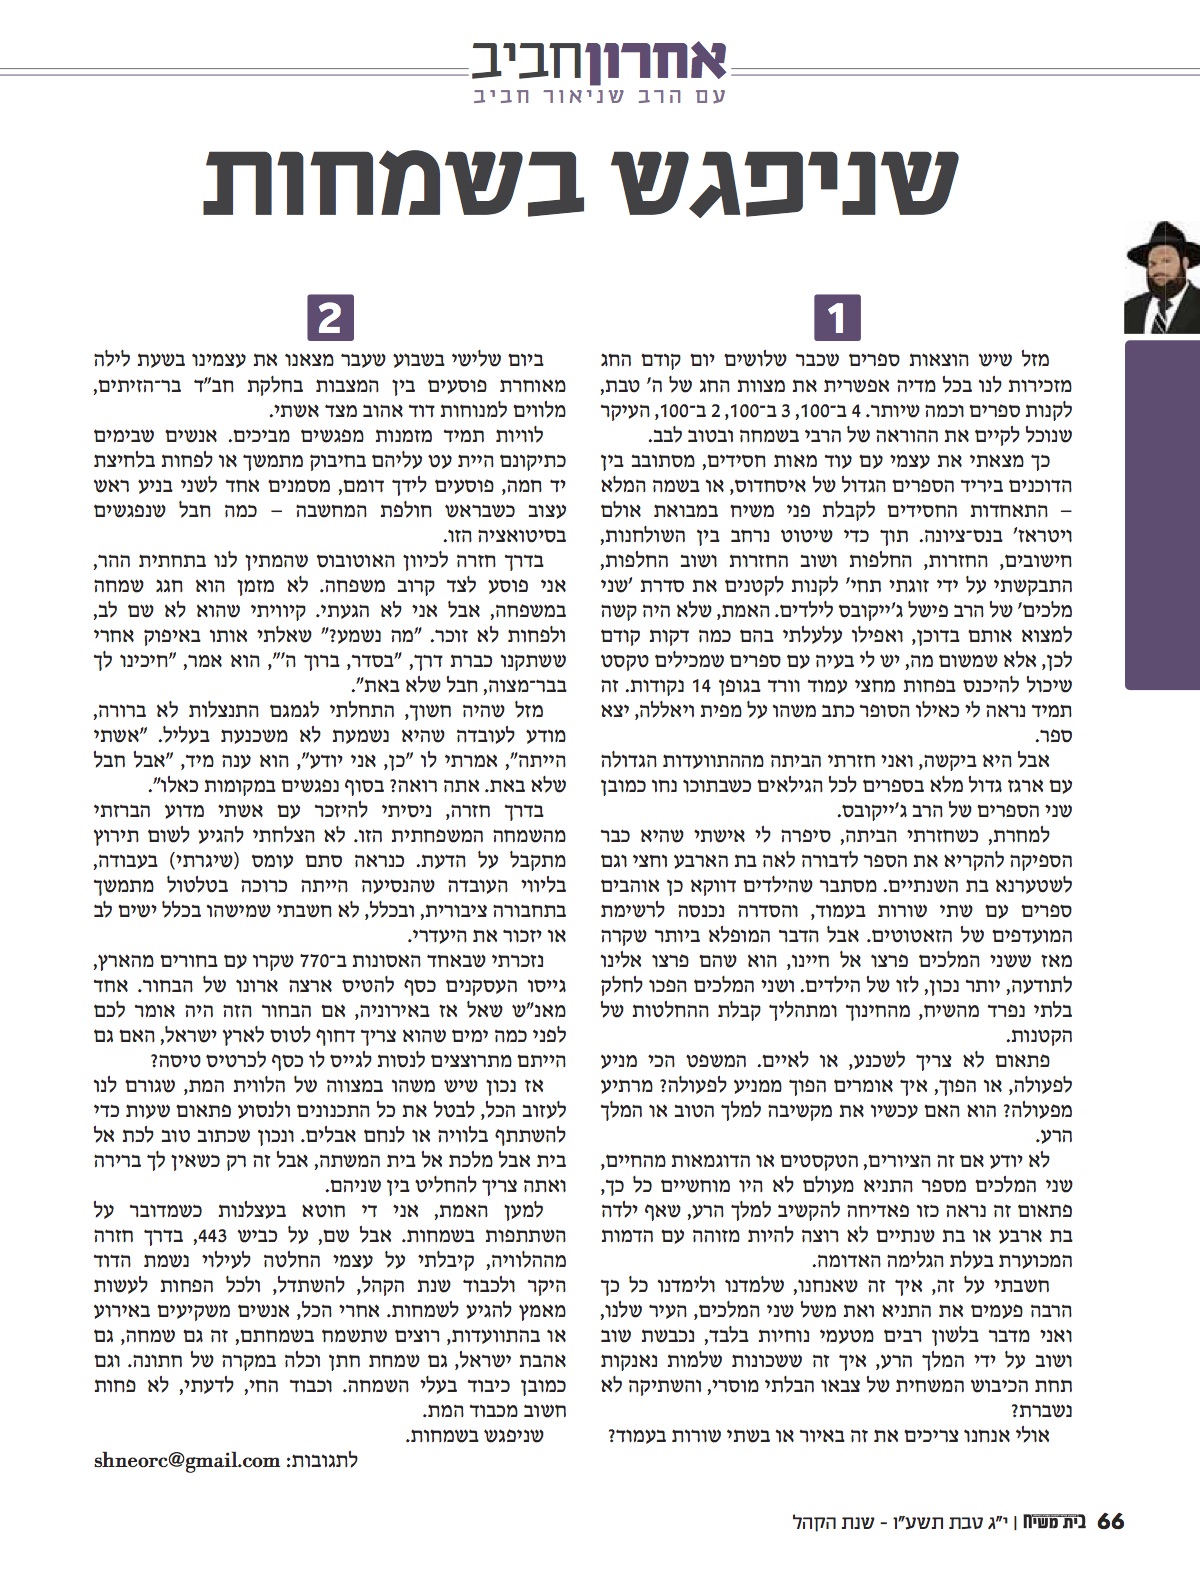 Hebrew Two Kings article